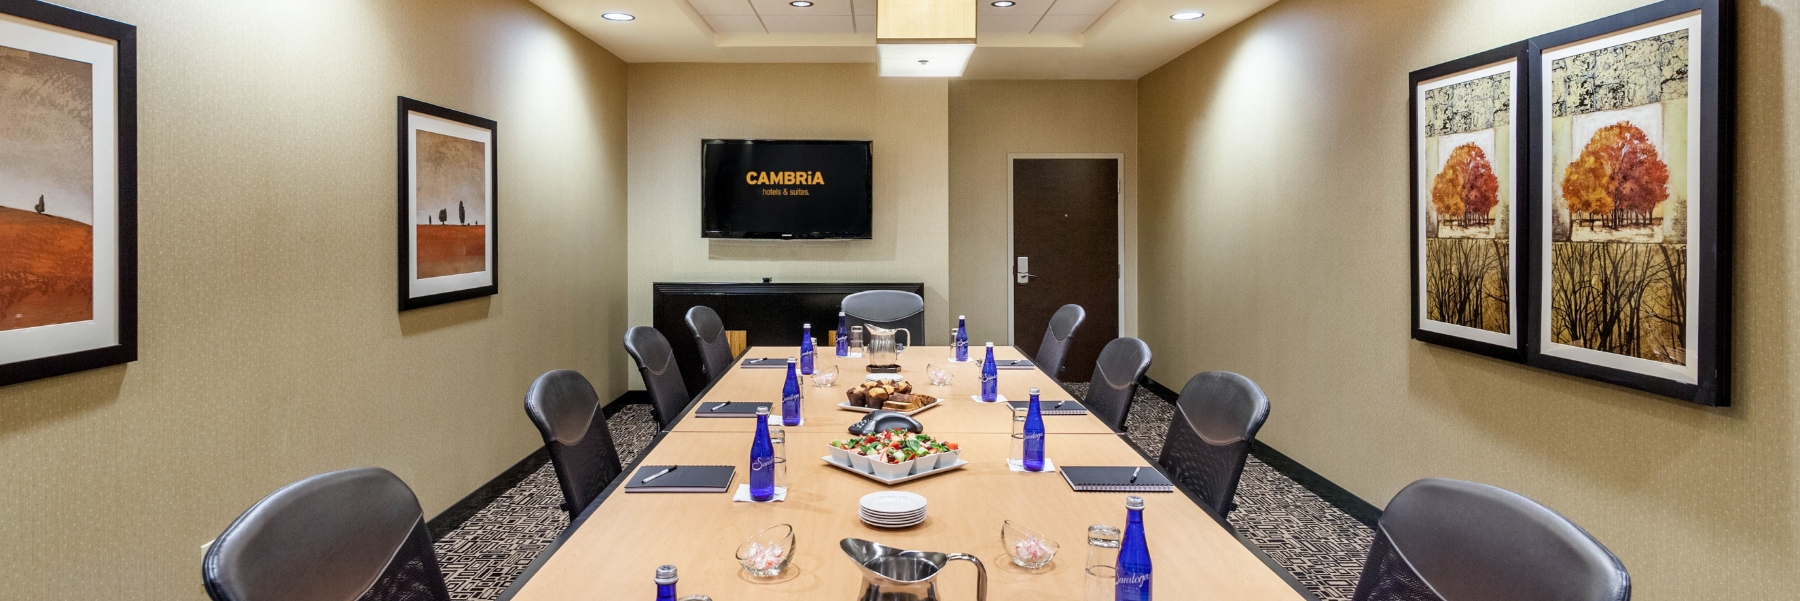 Meetings & Events Venues, Cambria Hotel Pittsburgh - Downtown